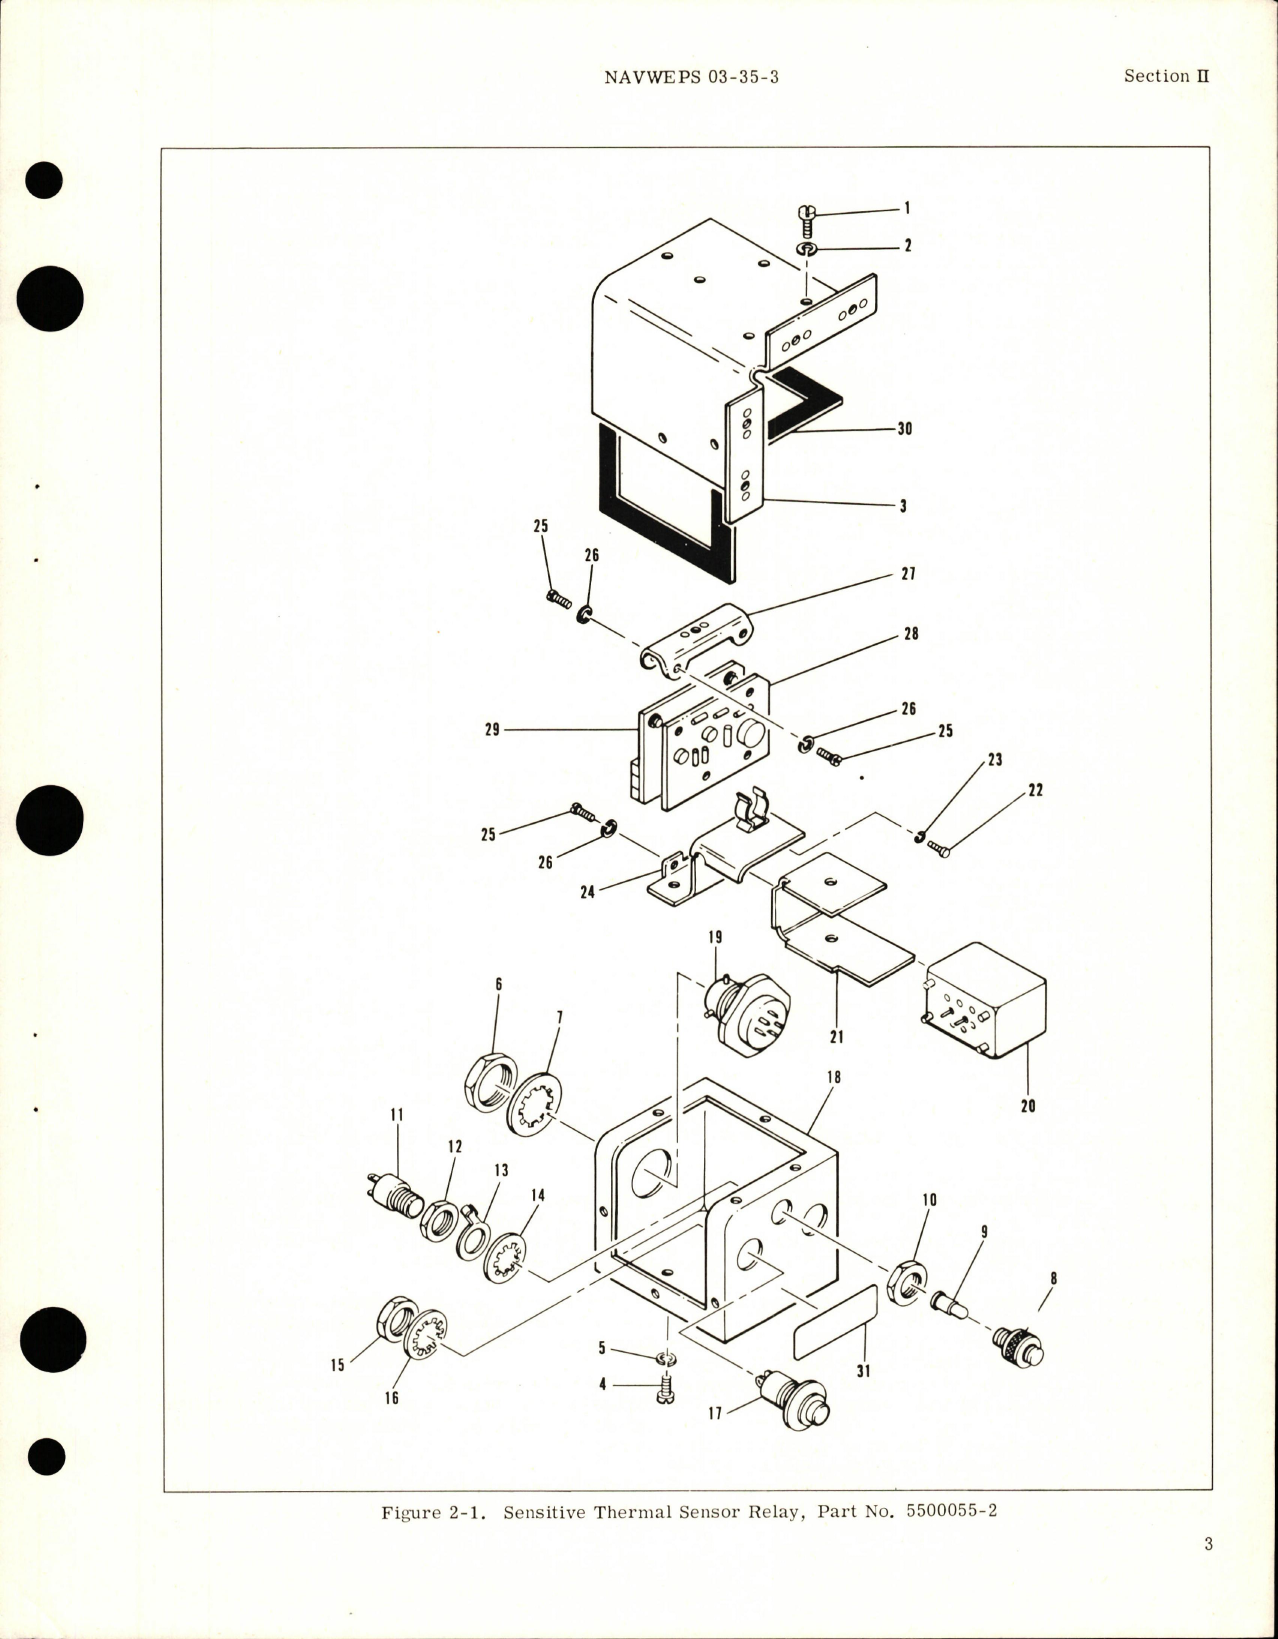 Sample page 7 from AirCorps Library document: Overhaul Instructions for Sensitive Thermal Sensor Relay - Part 5500055-2